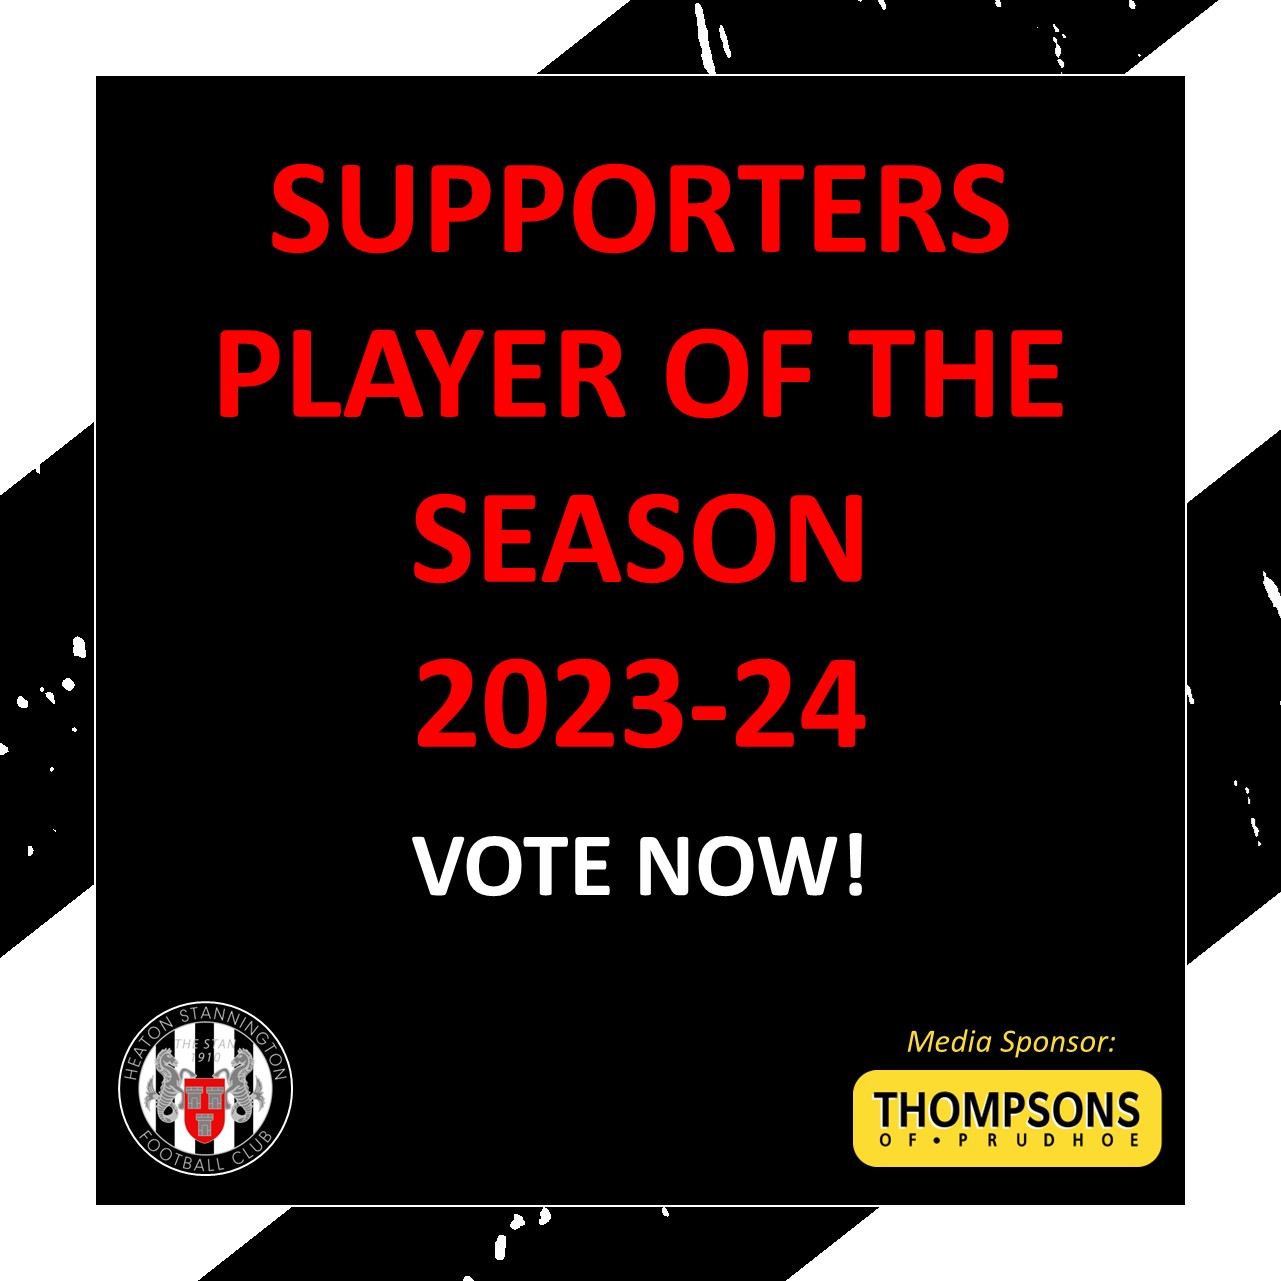 Supporters Player of the Season 2023-24